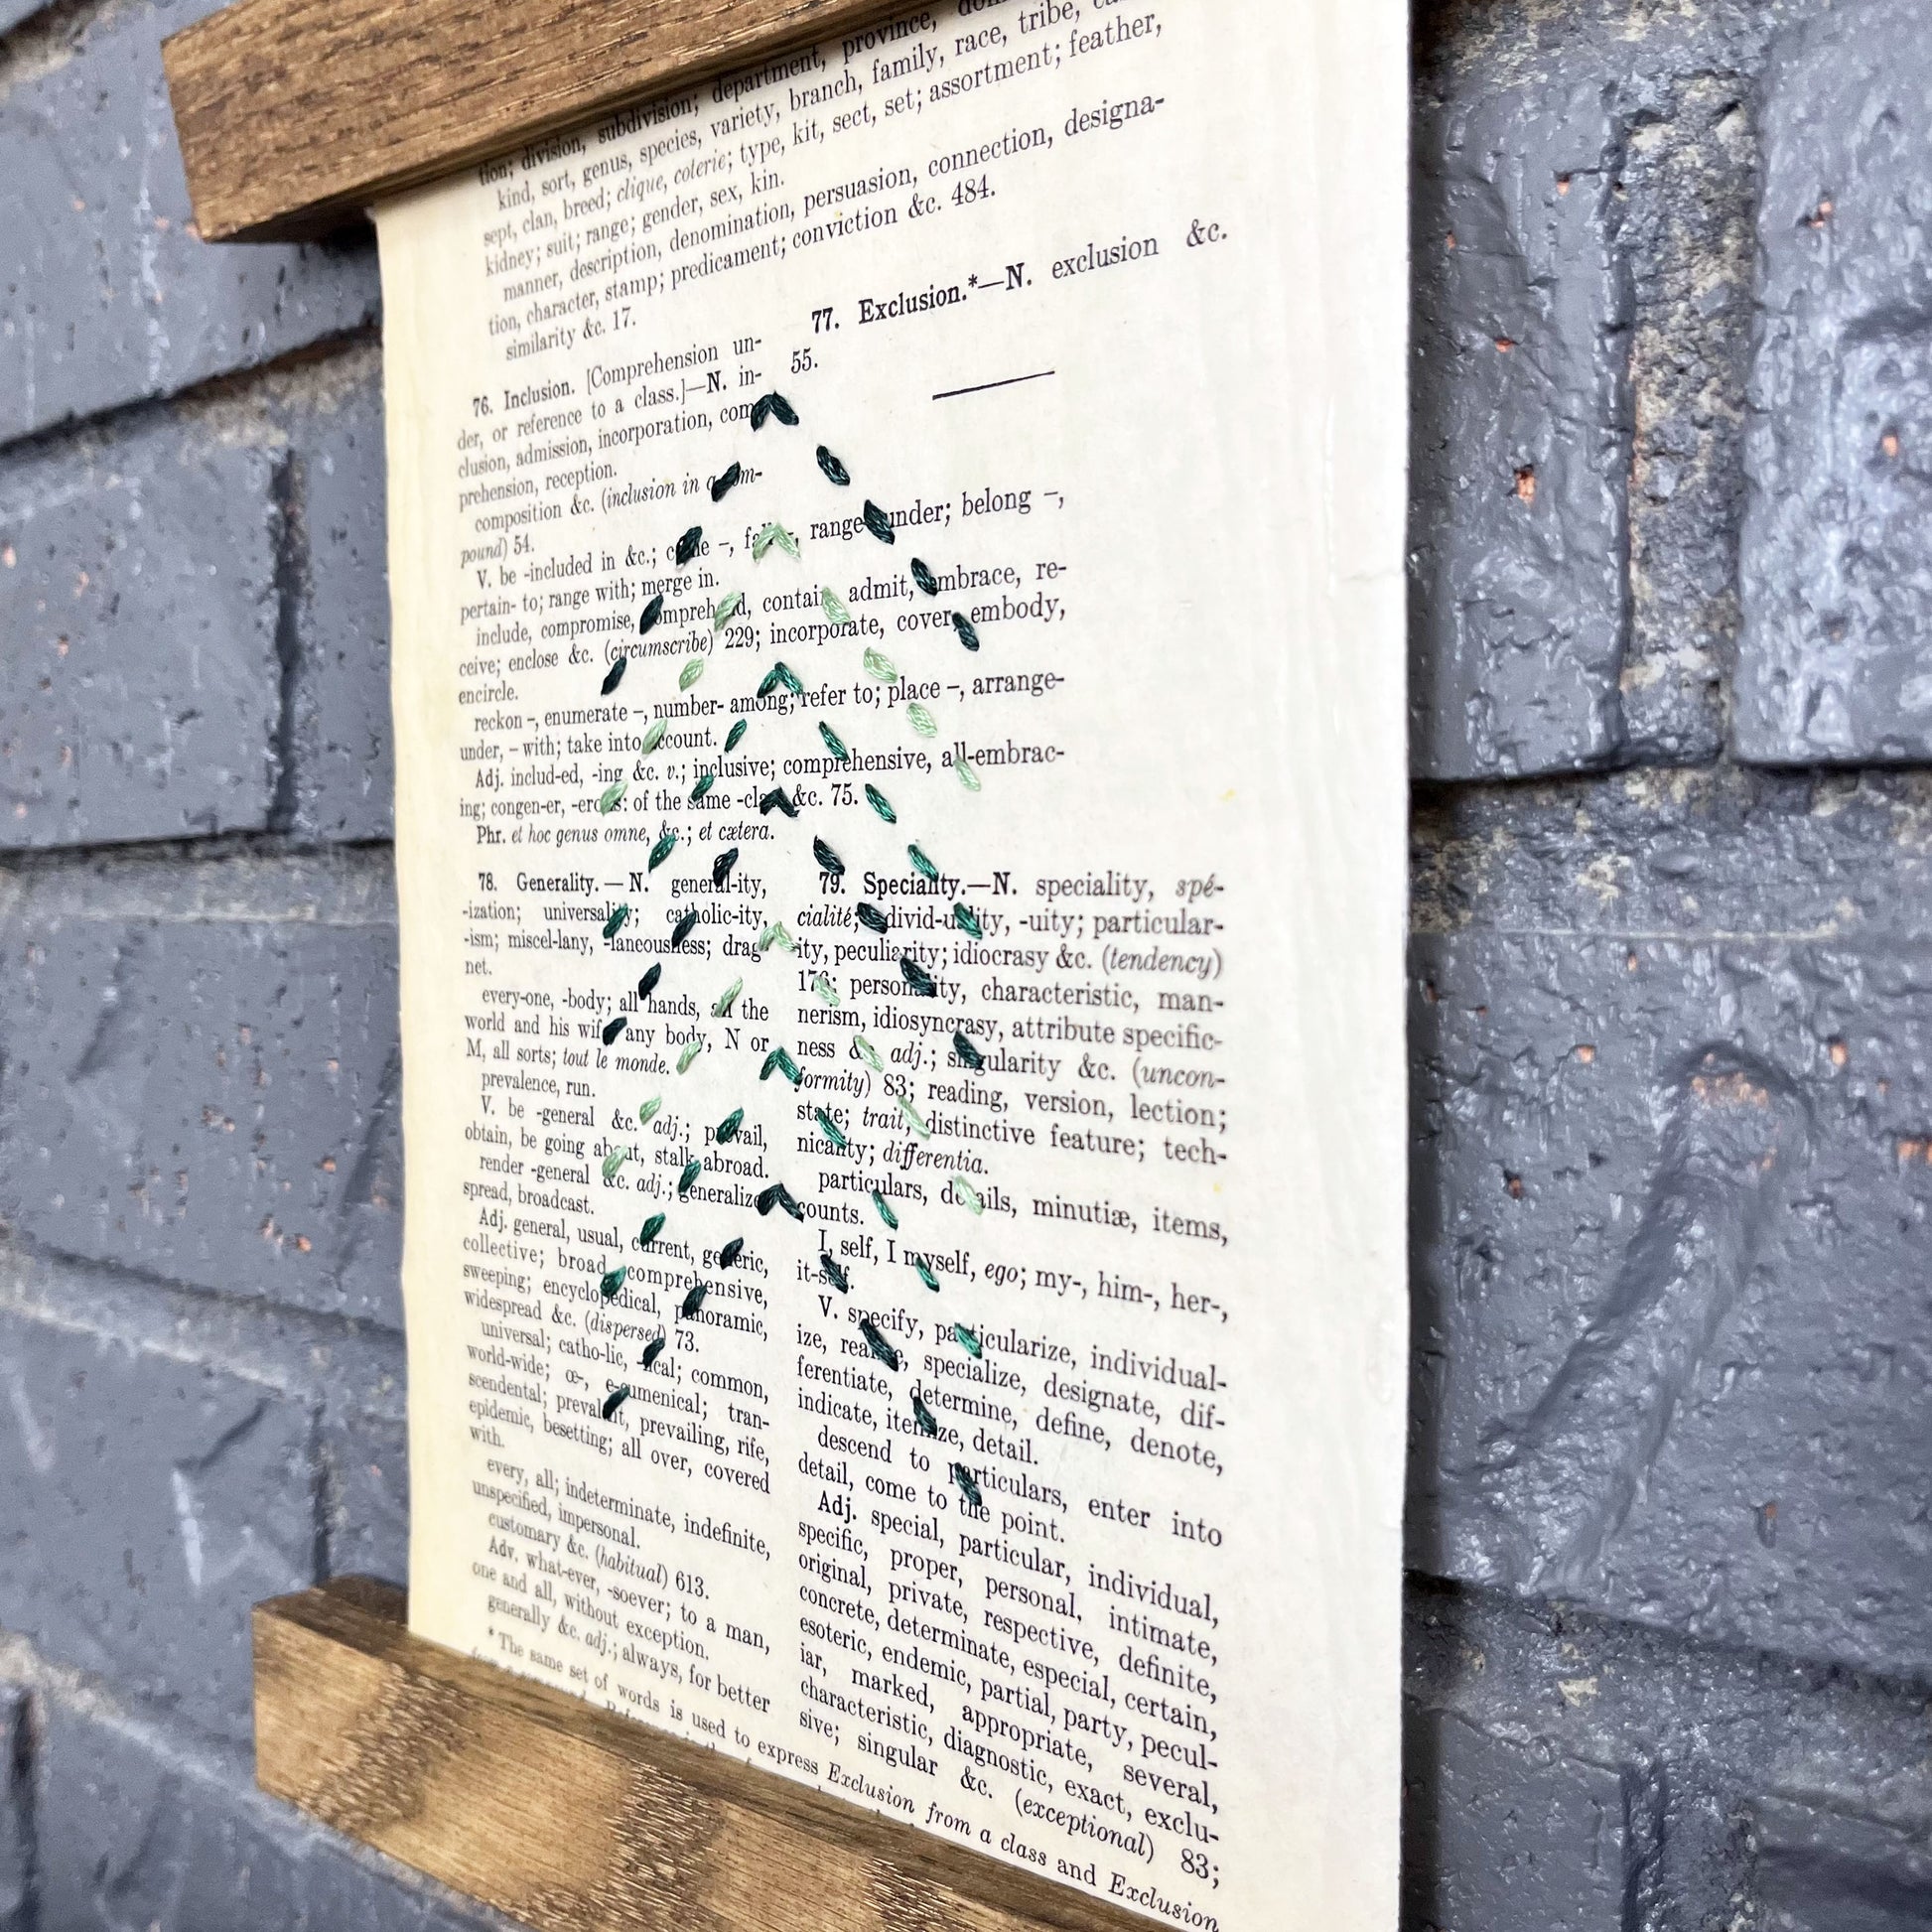 a paper wall hanging in a magnetic wood frame, made from a vintage thesaurus page, embroidered with the shape of a Christmas tree made from running stitches forming a column of chevrons, in shades of pine green thread, hanging on a grey brick wall